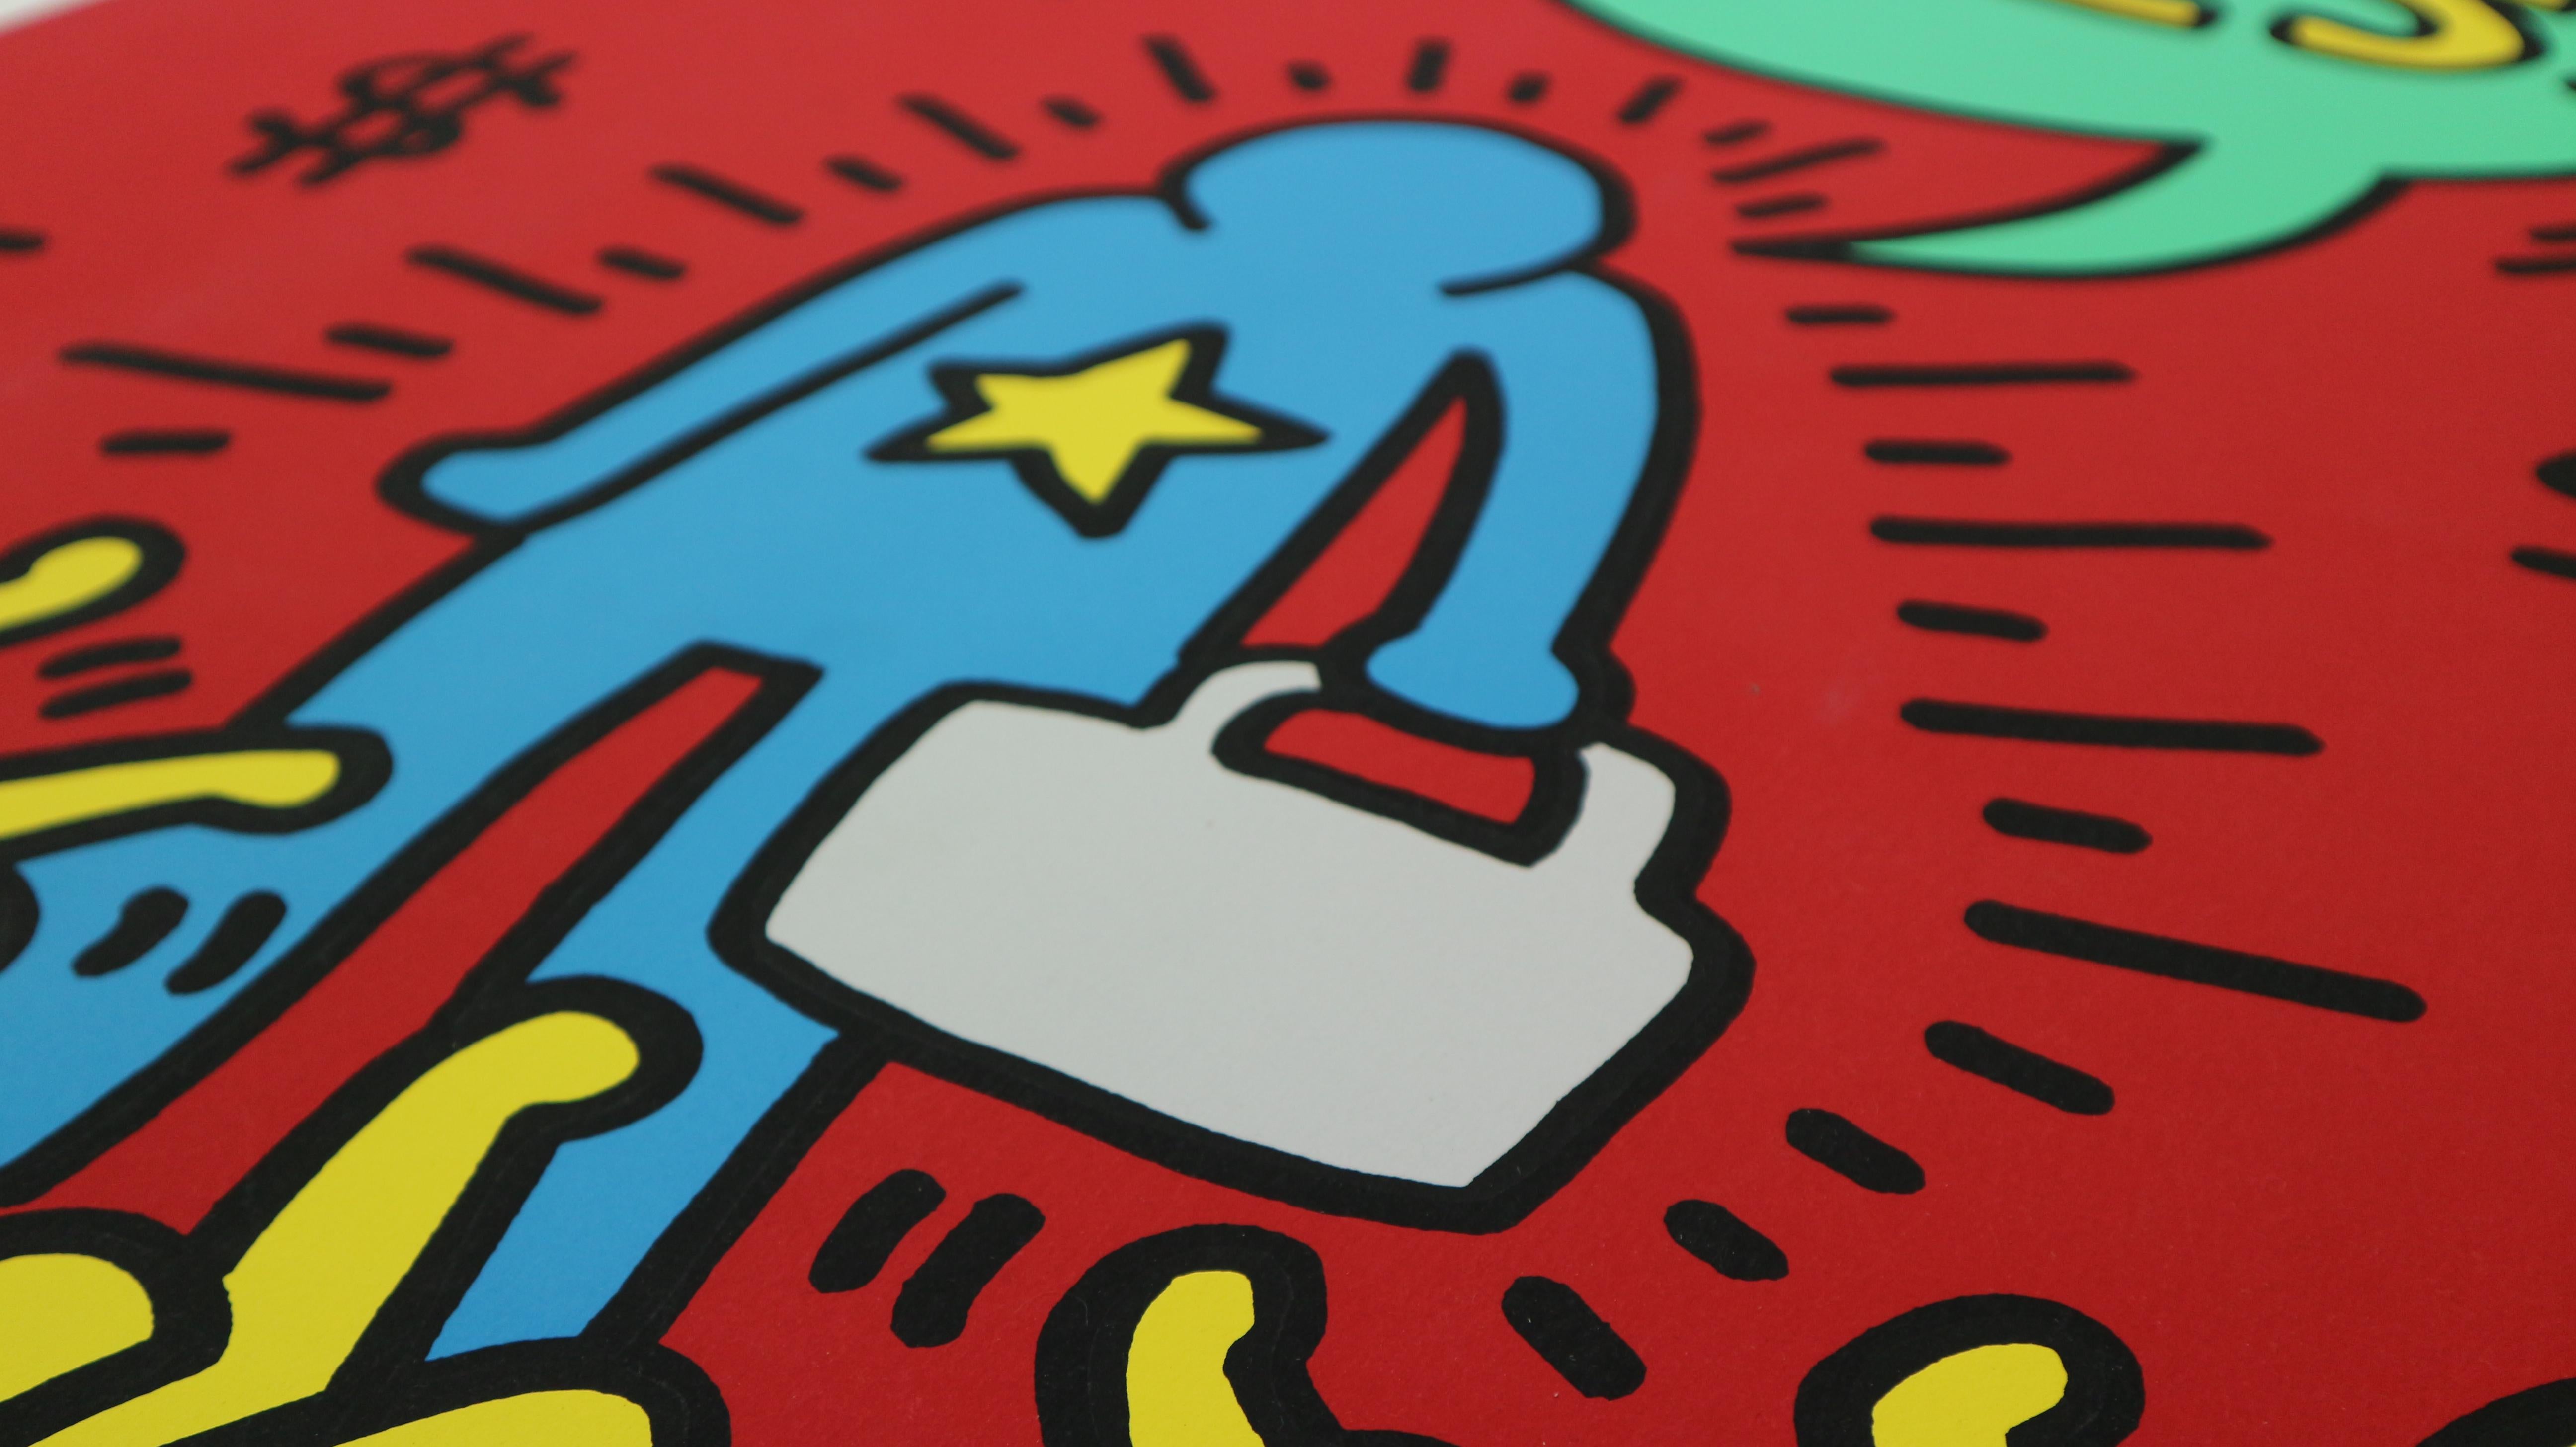 Silkscreen Poster by Keith Haring Lithograph 